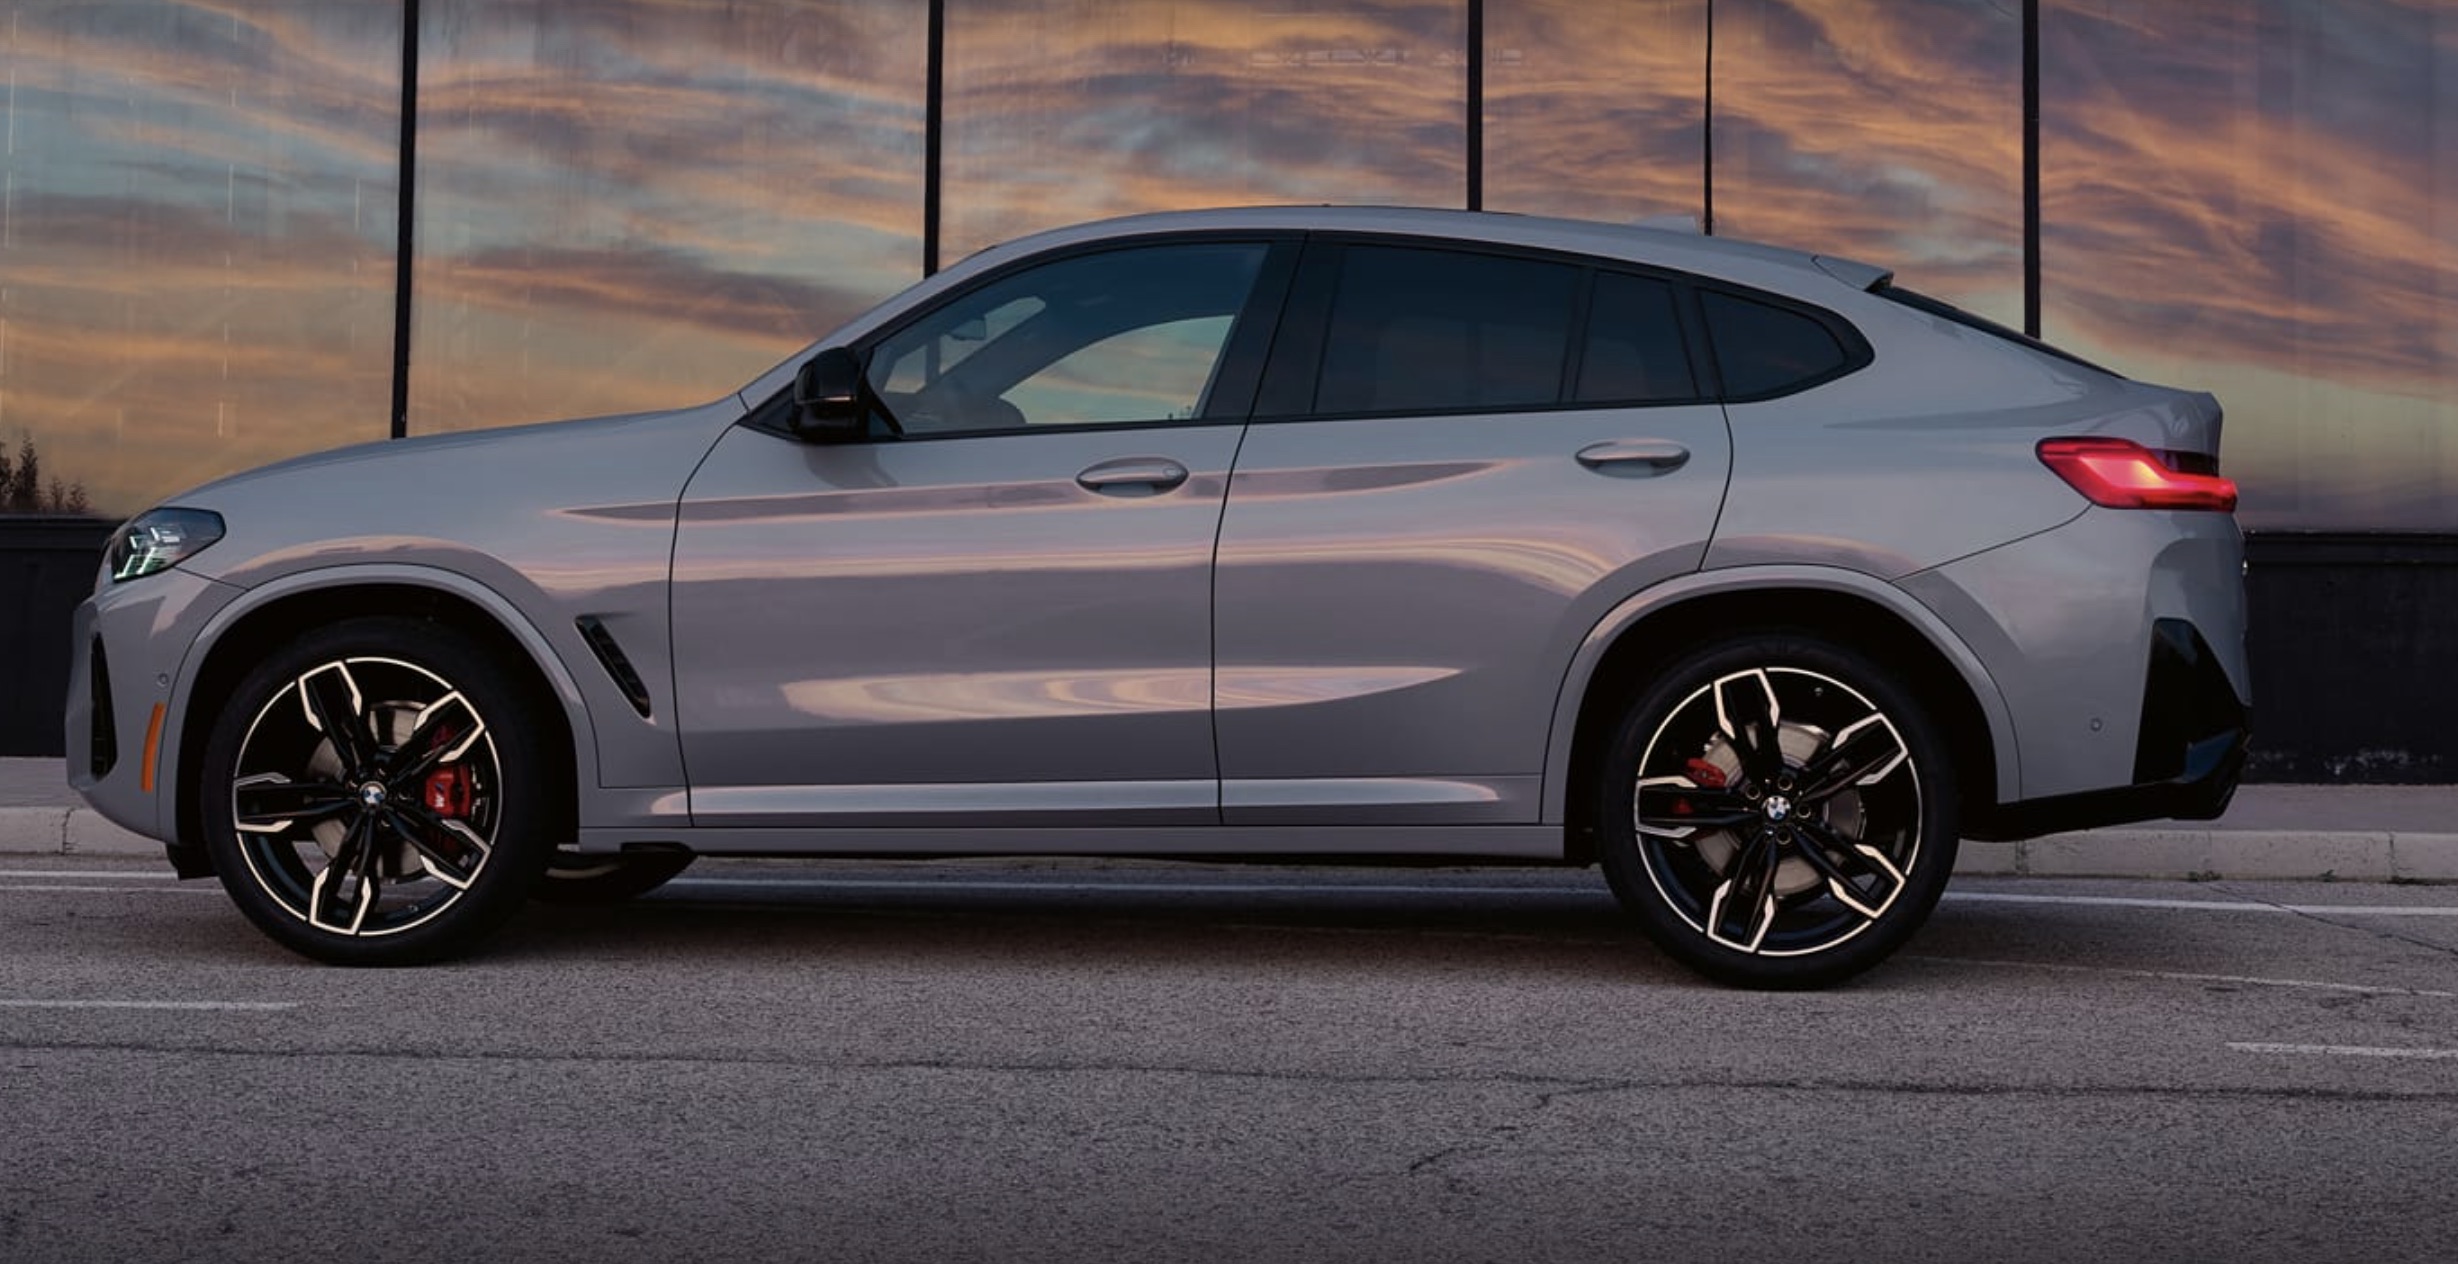 BMW X4 M30i parked with the sun setting out of frame.